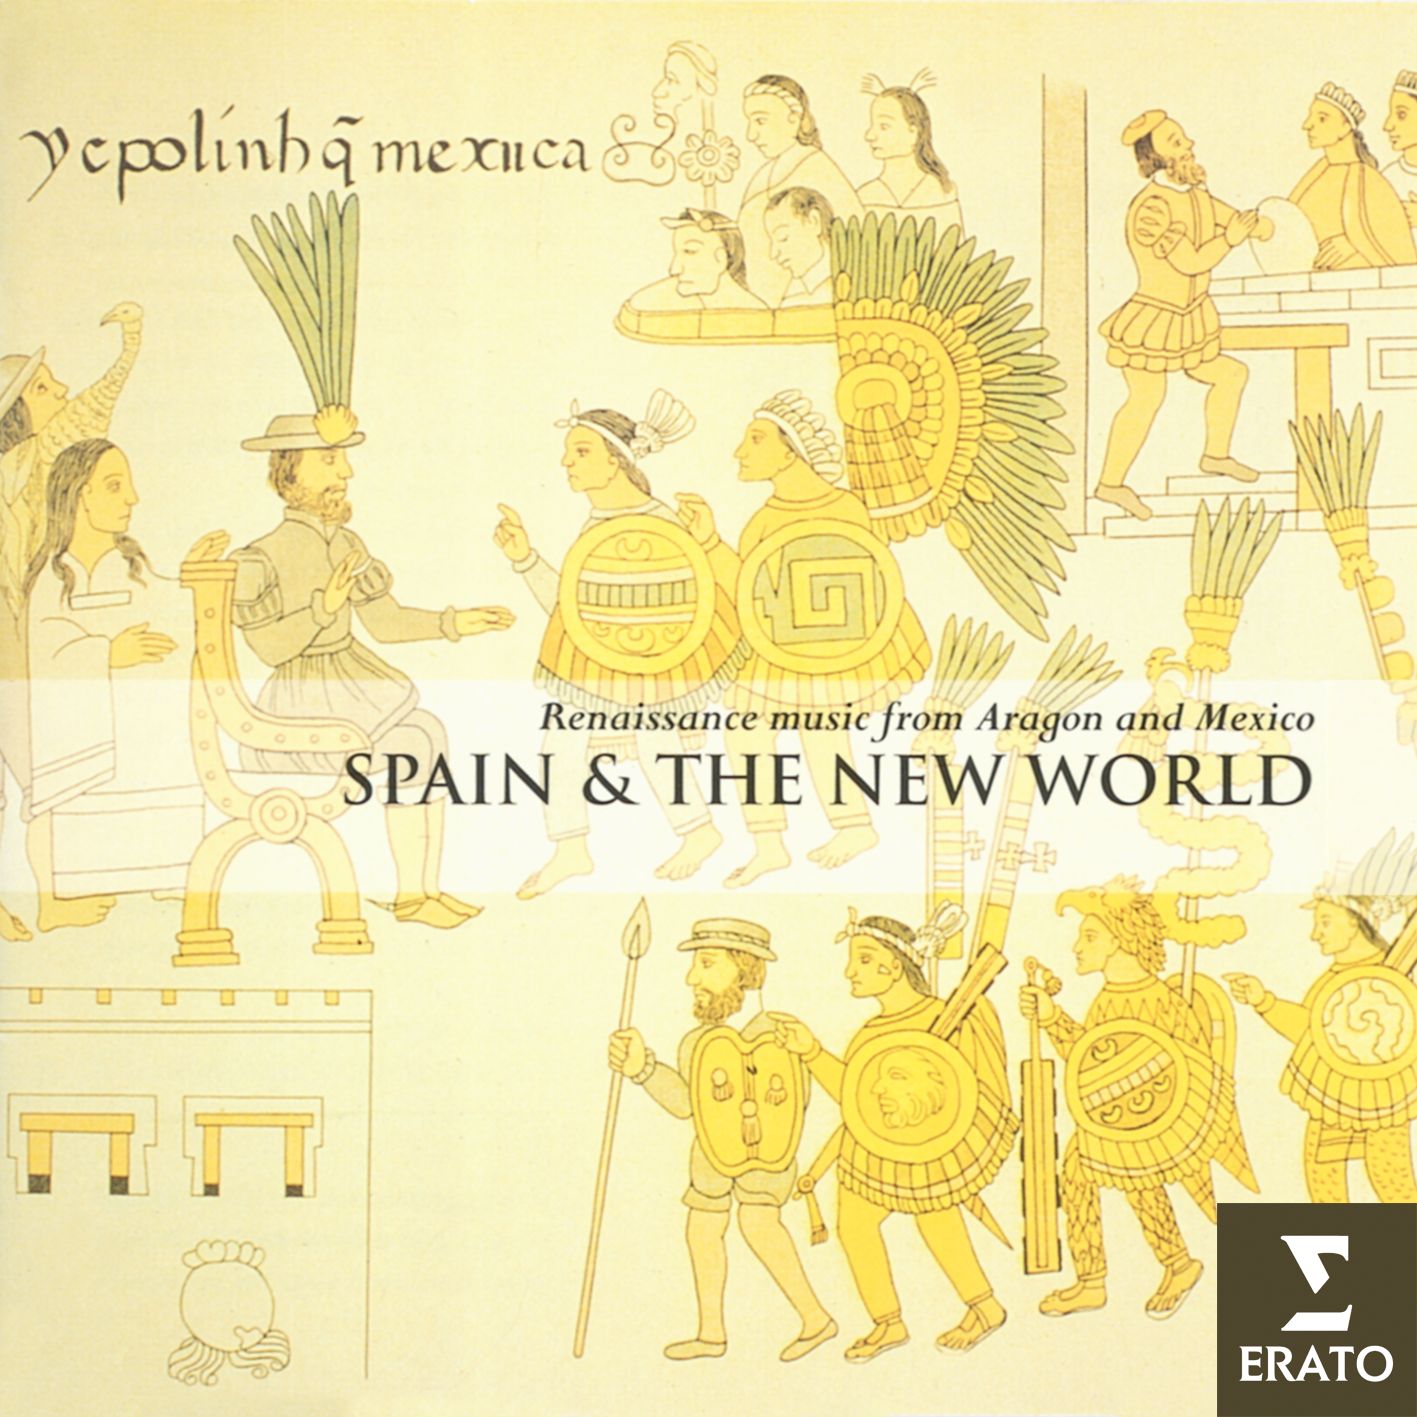 Spain and the New World- Renaissance music from Aragon and Mexico